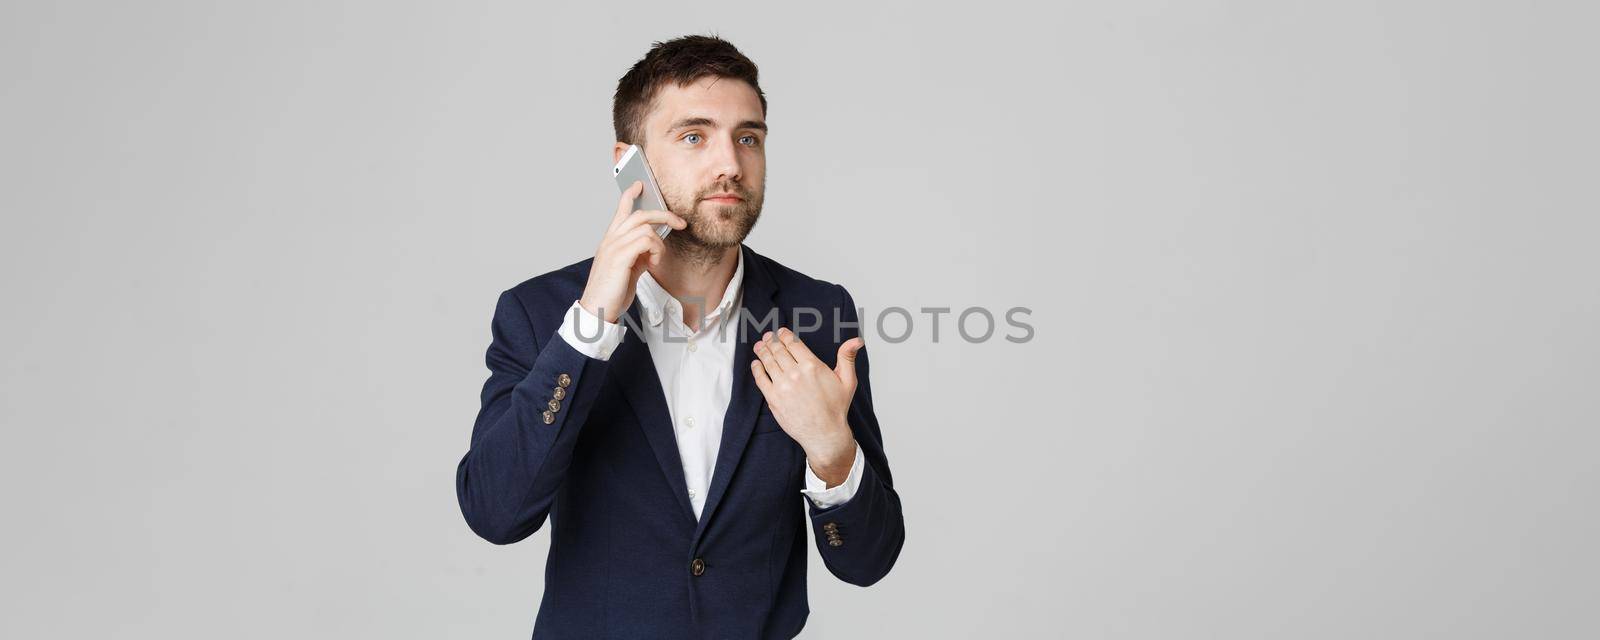 Business Concept - Portrait young handsome angry business man in suit talking on phone looking at camera. White background.